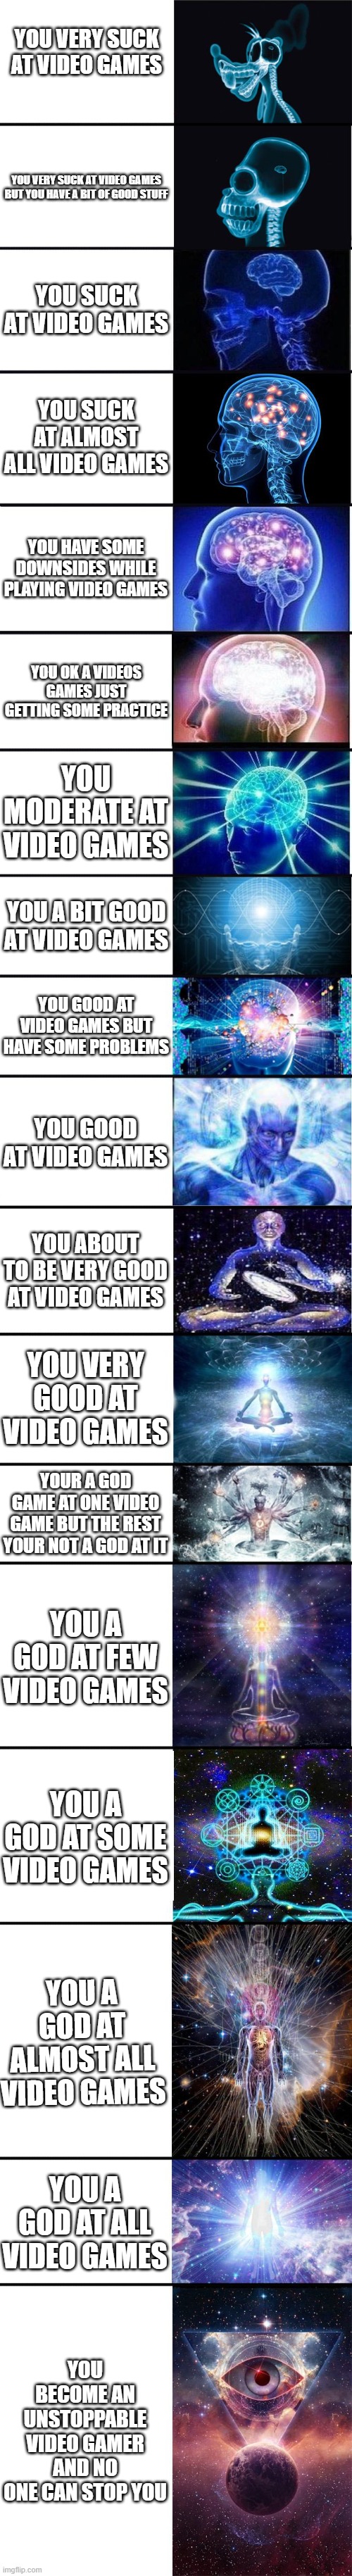 The levels of gaming | YOU VERY SUCK AT VIDEO GAMES; YOU VERY SUCK AT VIDEO GAMES BUT YOU HAVE A BIT OF GOOD STUFF; YOU SUCK AT VIDEO GAMES; YOU SUCK AT ALMOST ALL VIDEO GAMES; YOU HAVE SOME DOWNSIDES WHILE PLAYING VIDEO GAMES; YOU OK A VIDEOS GAMES JUST GETTING SOME PRACTICE; YOU MODERATE AT VIDEO GAMES; YOU A BIT GOOD AT VIDEO GAMES; YOU GOOD AT VIDEO GAMES BUT HAVE SOME PROBLEMS; YOU GOOD AT VIDEO GAMES; YOU ABOUT TO BE VERY GOOD AT VIDEO GAMES; YOU VERY GOOD AT VIDEO GAMES; YOUR A GOD GAME AT ONE VIDEO GAME BUT THE REST YOUR NOT A GOD AT IT; YOU A GOD AT FEW VIDEO GAMES; YOU A GOD AT SOME VIDEO GAMES; YOU A GOD AT ALMOST ALL VIDEO GAMES; YOU A GOD AT ALL VIDEO GAMES; YOU BECOME AN UNSTOPPABLE VIDEO GAMER AND NO ONE CAN STOP YOU | image tagged in expanding brain 9001,the level of gaming | made w/ Imgflip meme maker